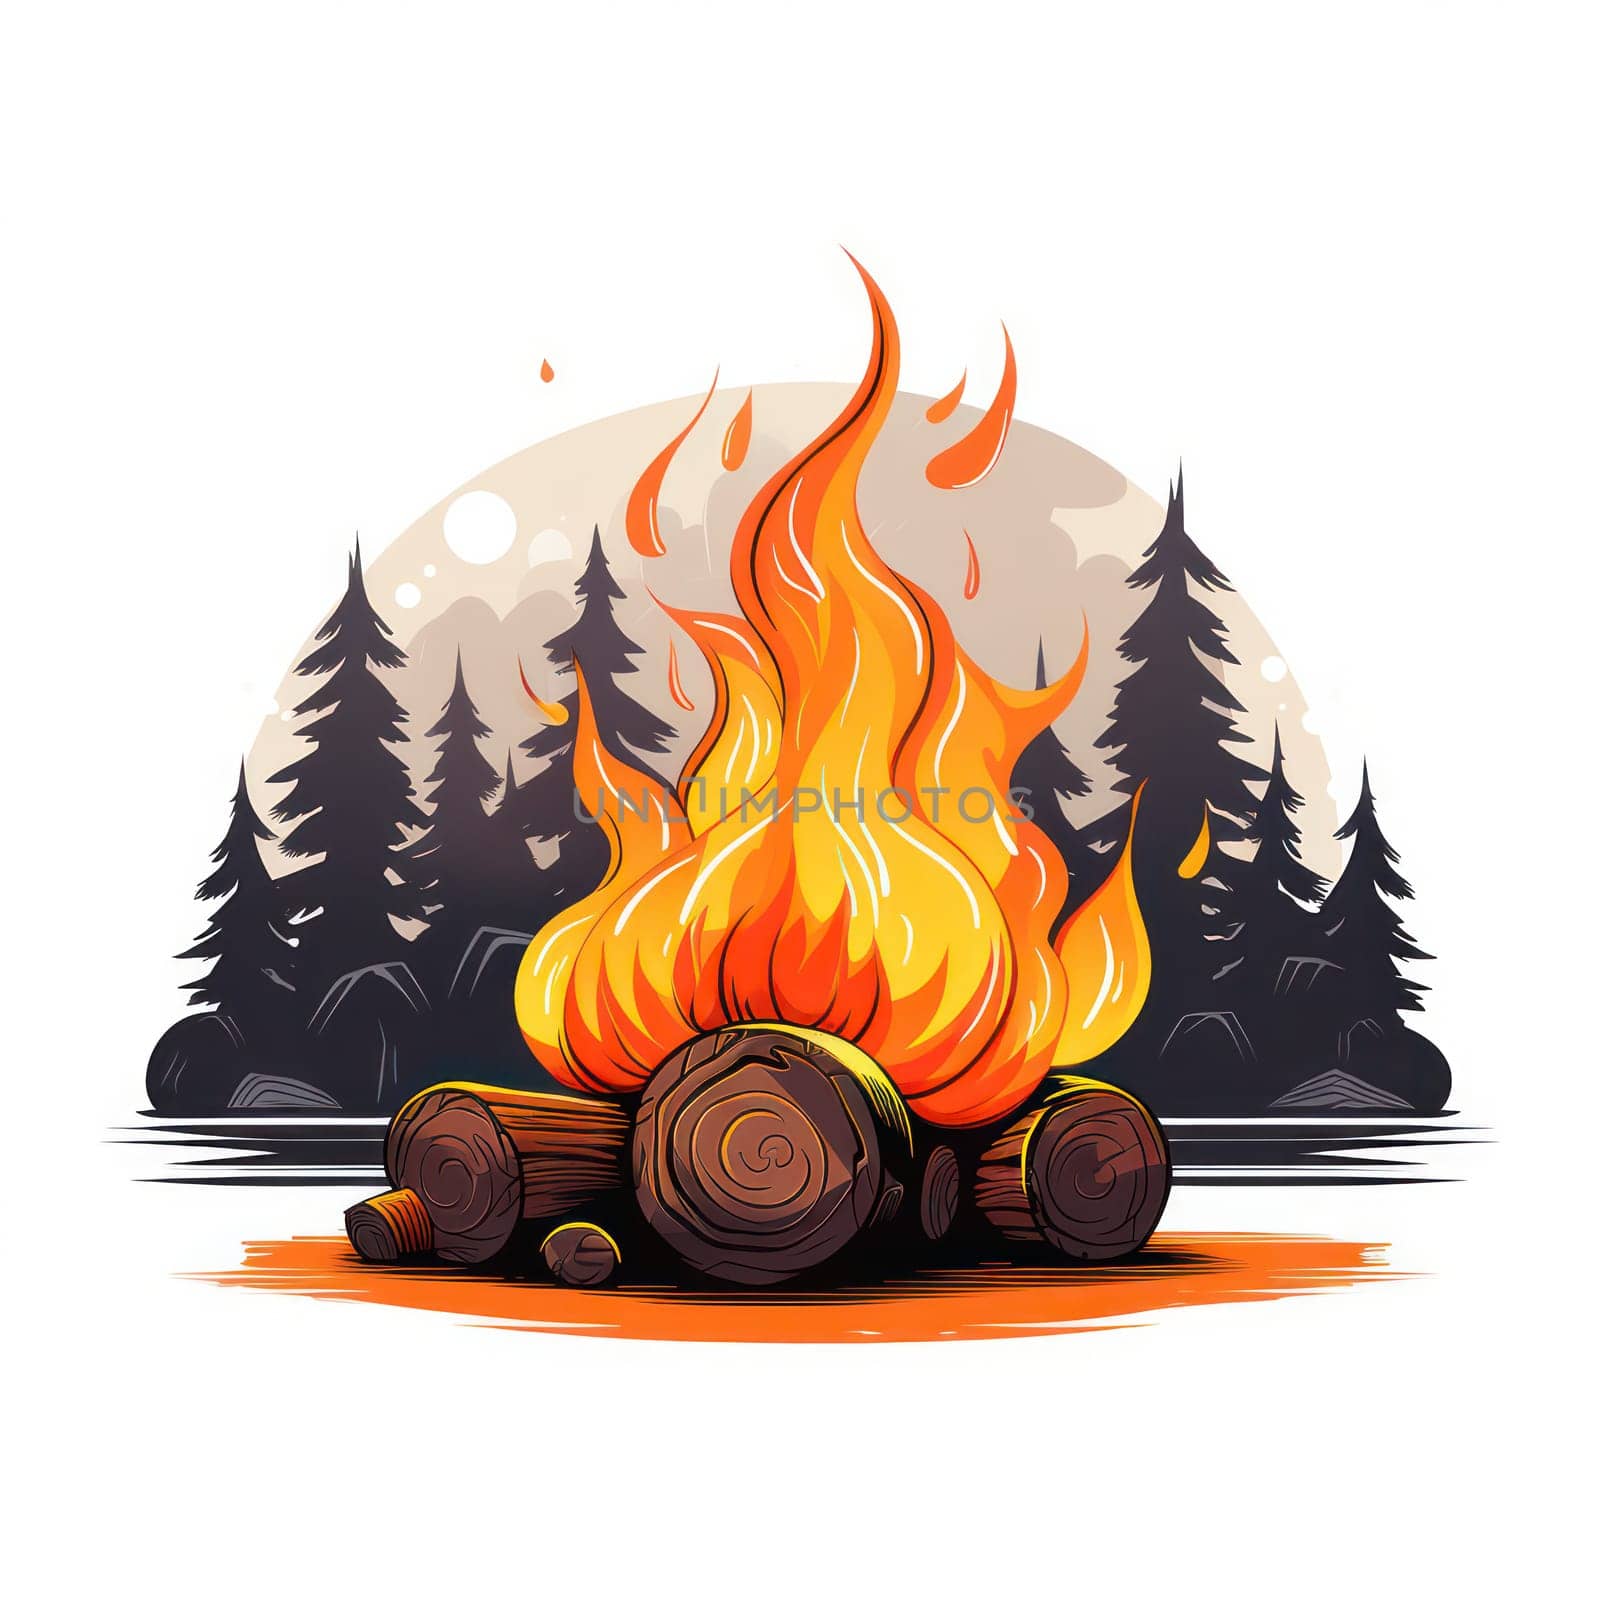 Flames of Nature's Fiery Delight: A Vibrant Campfire Igniting Heat and Warmth.